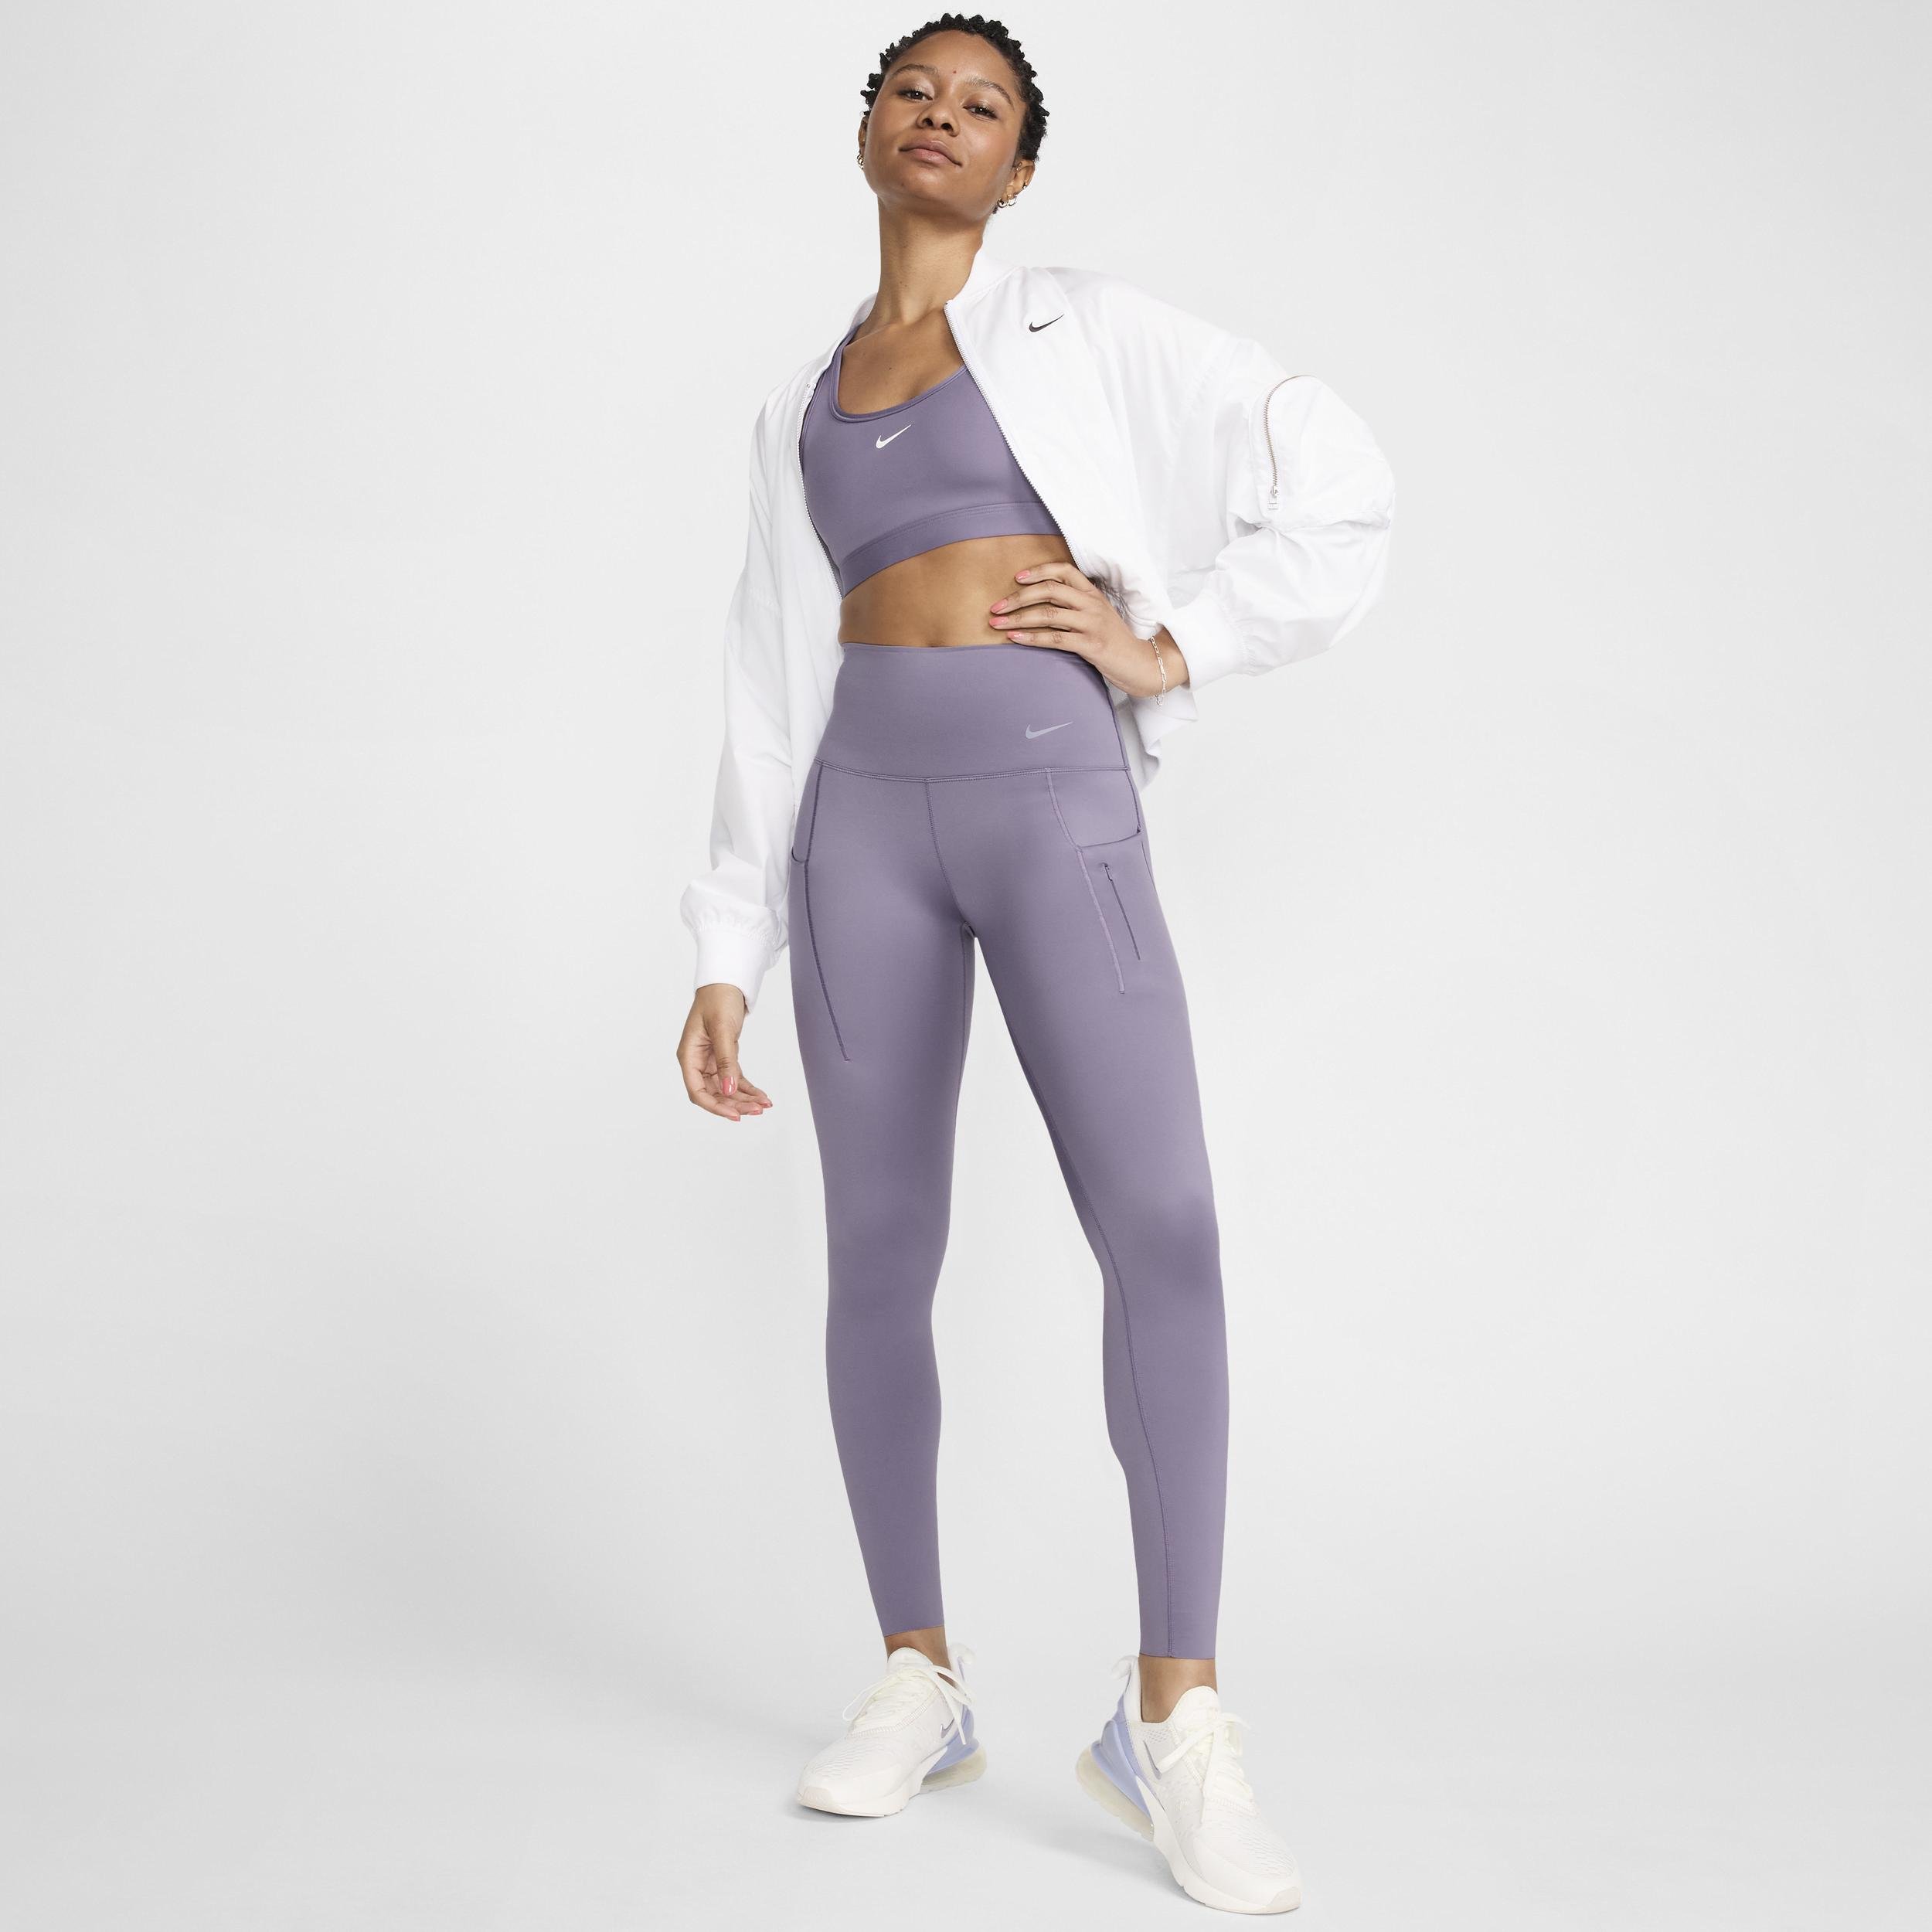 Nike Women's Go Firm-Support High-Waisted Full-Length Leggings with Pockets by NIKE